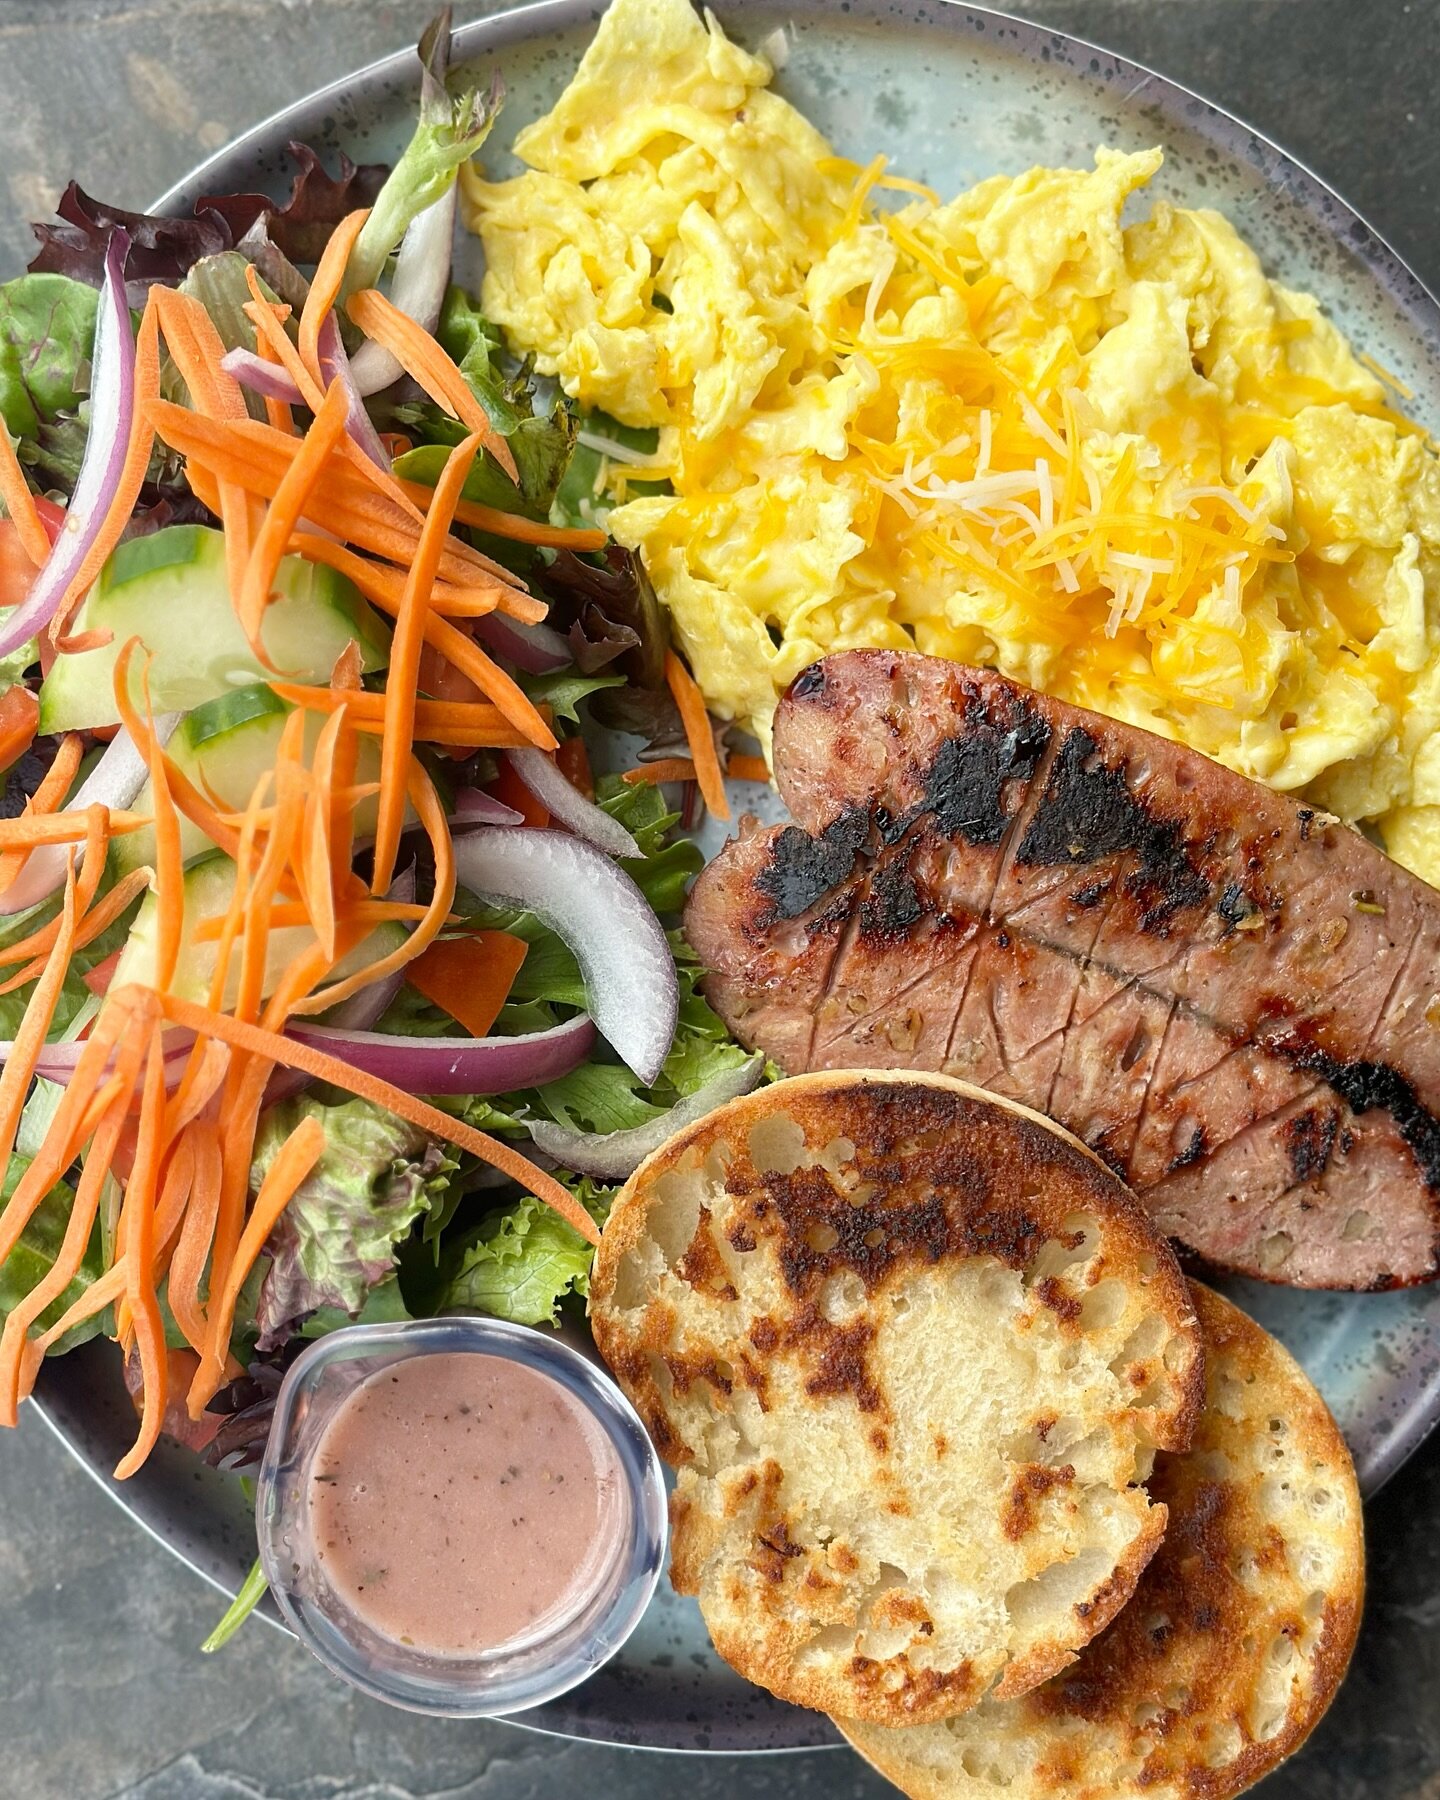 Y&rsquo;all that Egg Plate hit different today 😮&zwj;💨 Eggs scrambled with cheese, chicken sausage, spring mix salad, homemade red wine vinaigrette and English muffin with grape jam, OH MY!!!!! 😋

We serve breakfast all hours we&rsquo;re open! 🍳 